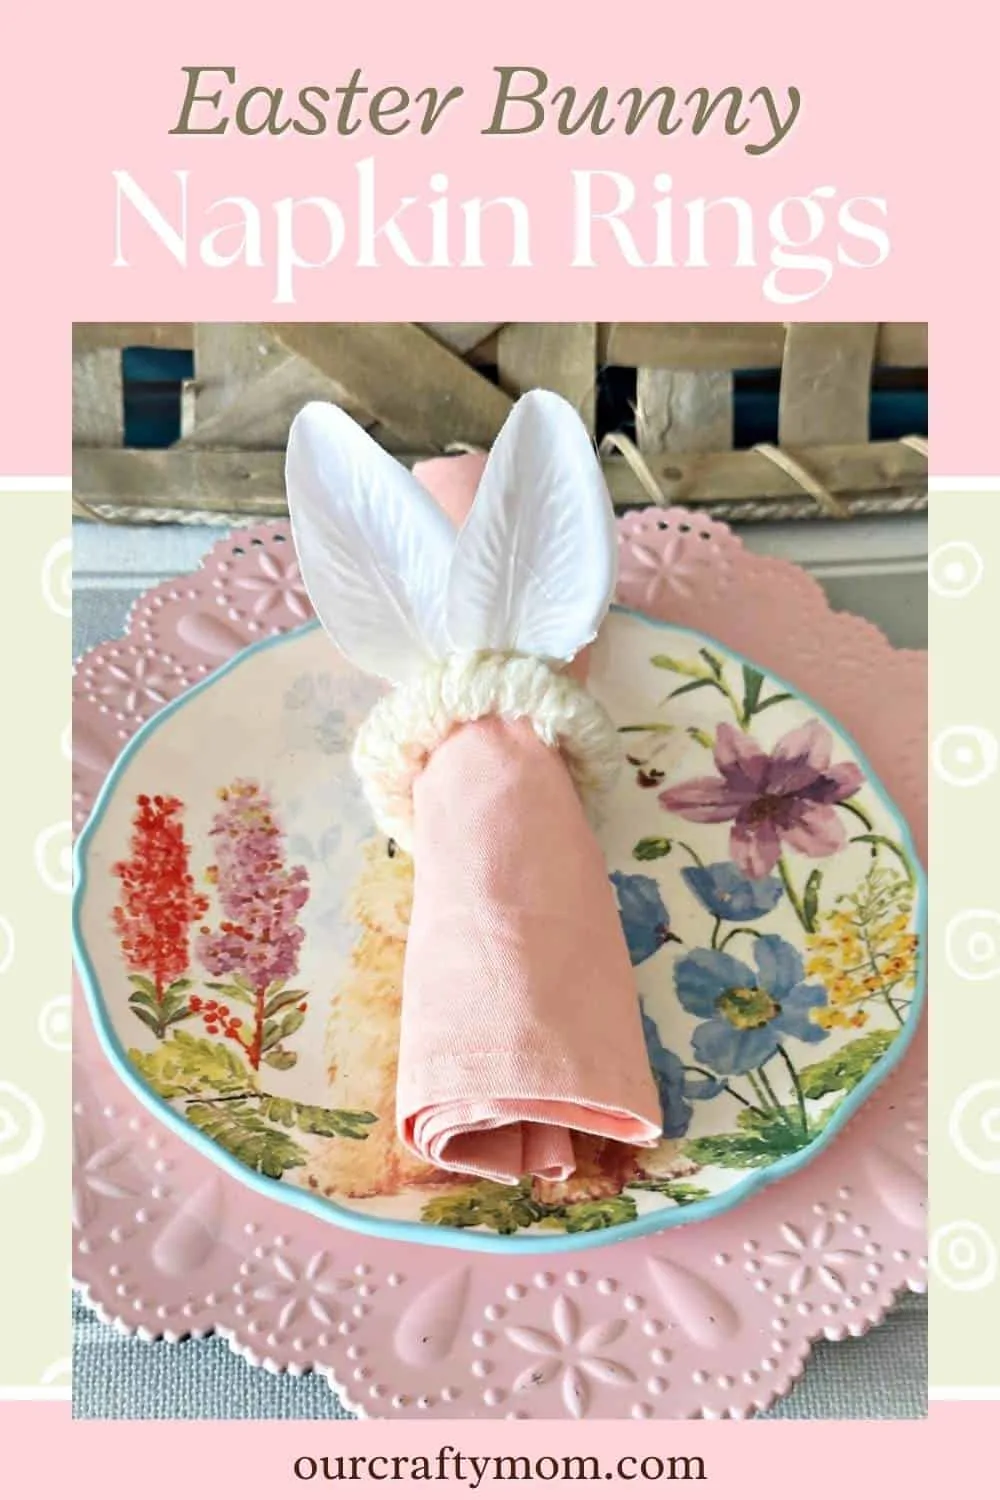 pin image with easter bunny napkin rings on plate